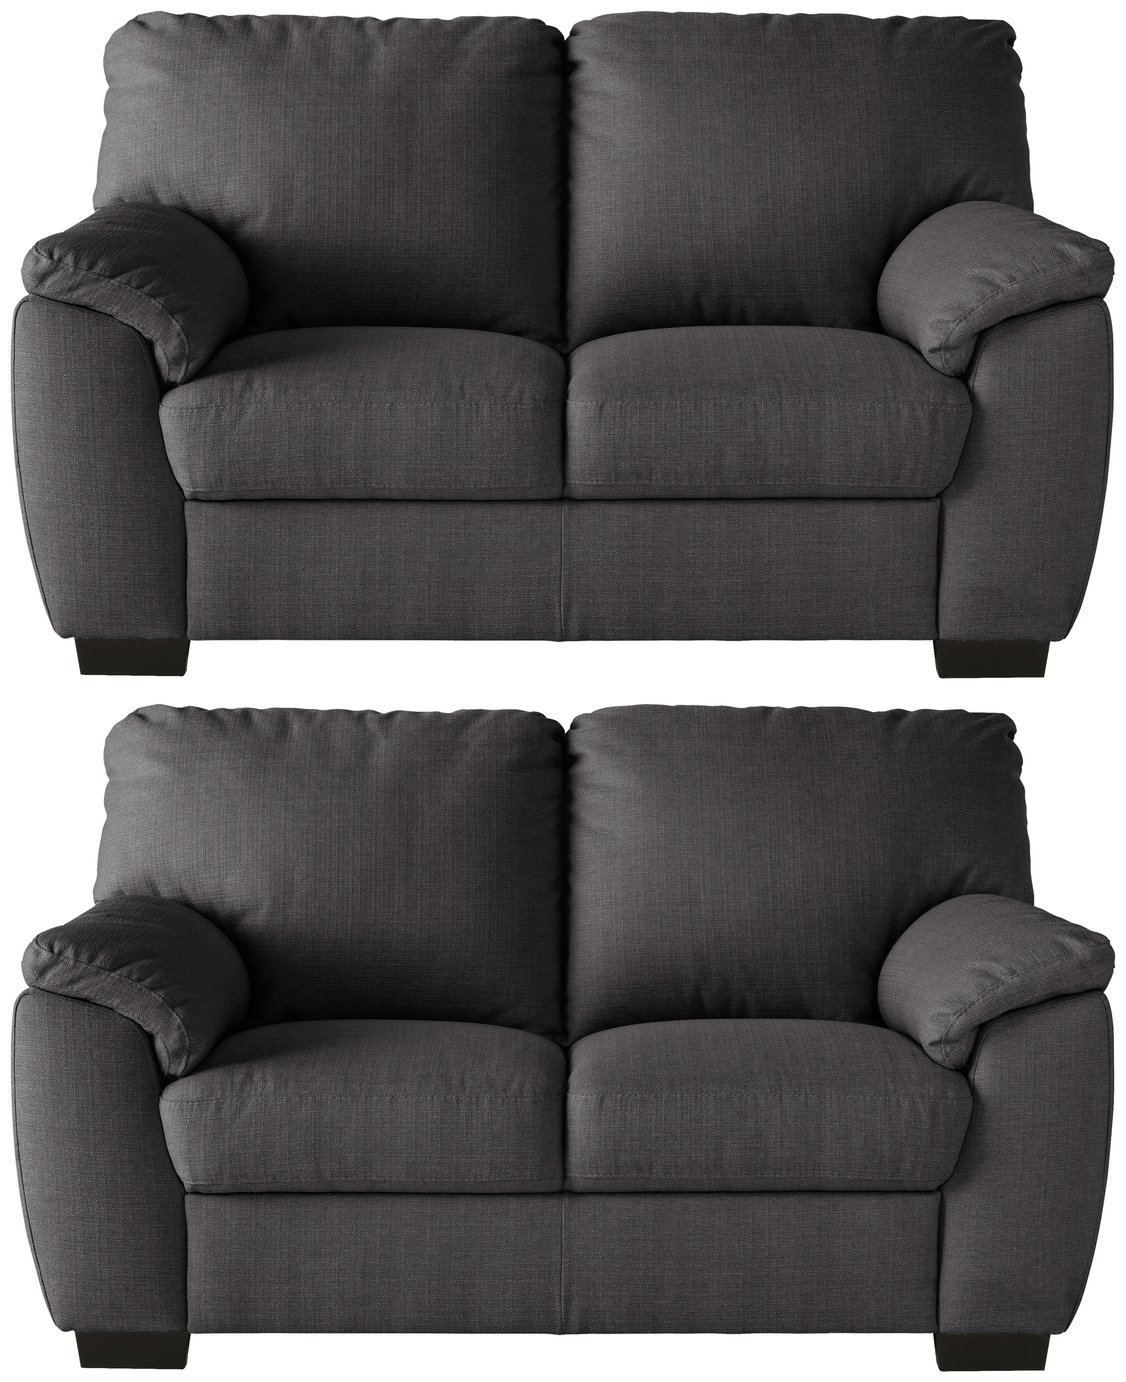 Argos Home Milano Pair of Fabric 2 Seater Sofa - Charcoal